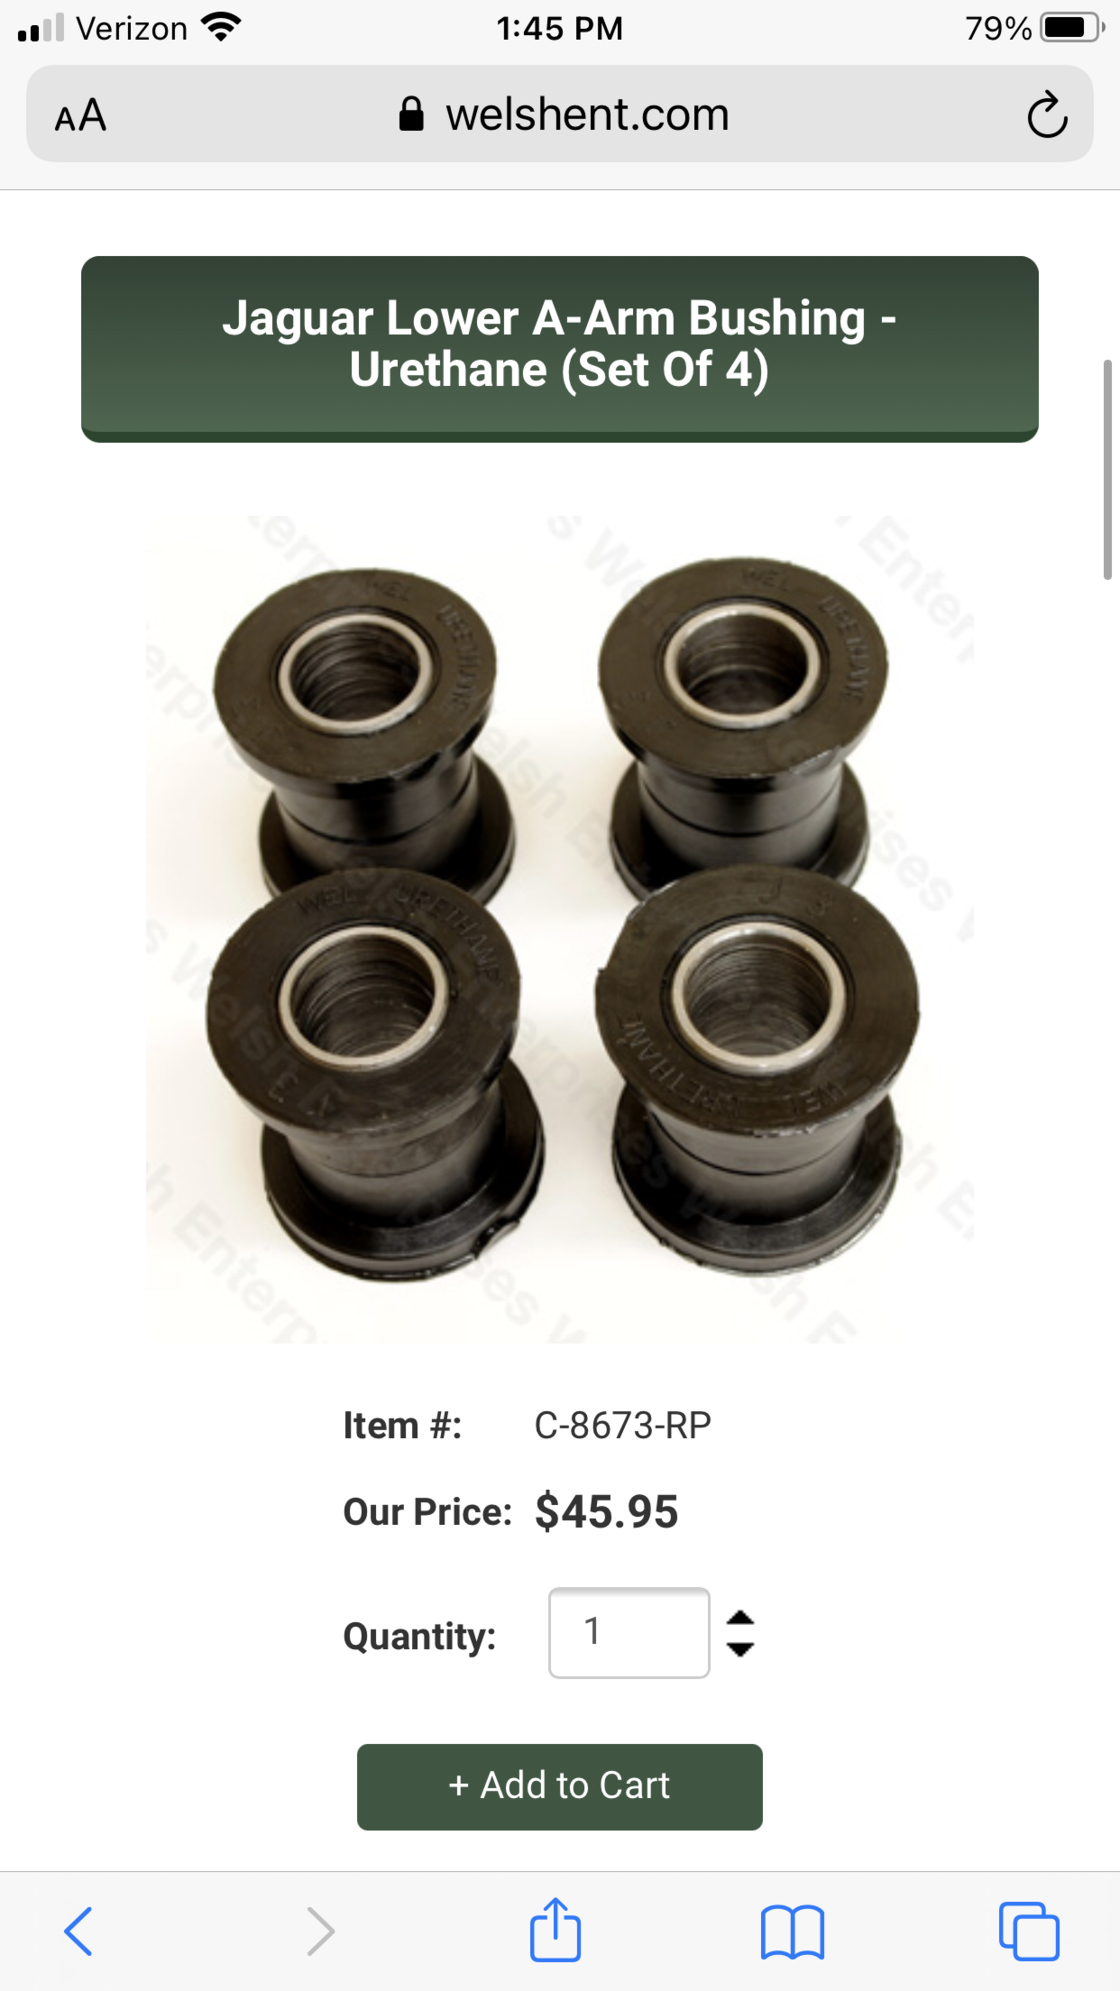 Steering/Suspension - Upper and lower ball joints and bushings xj6 - 115.00 - New - 1978 to 1984 Jaguar XJ6 - Canonsburg, PA 15317, United States